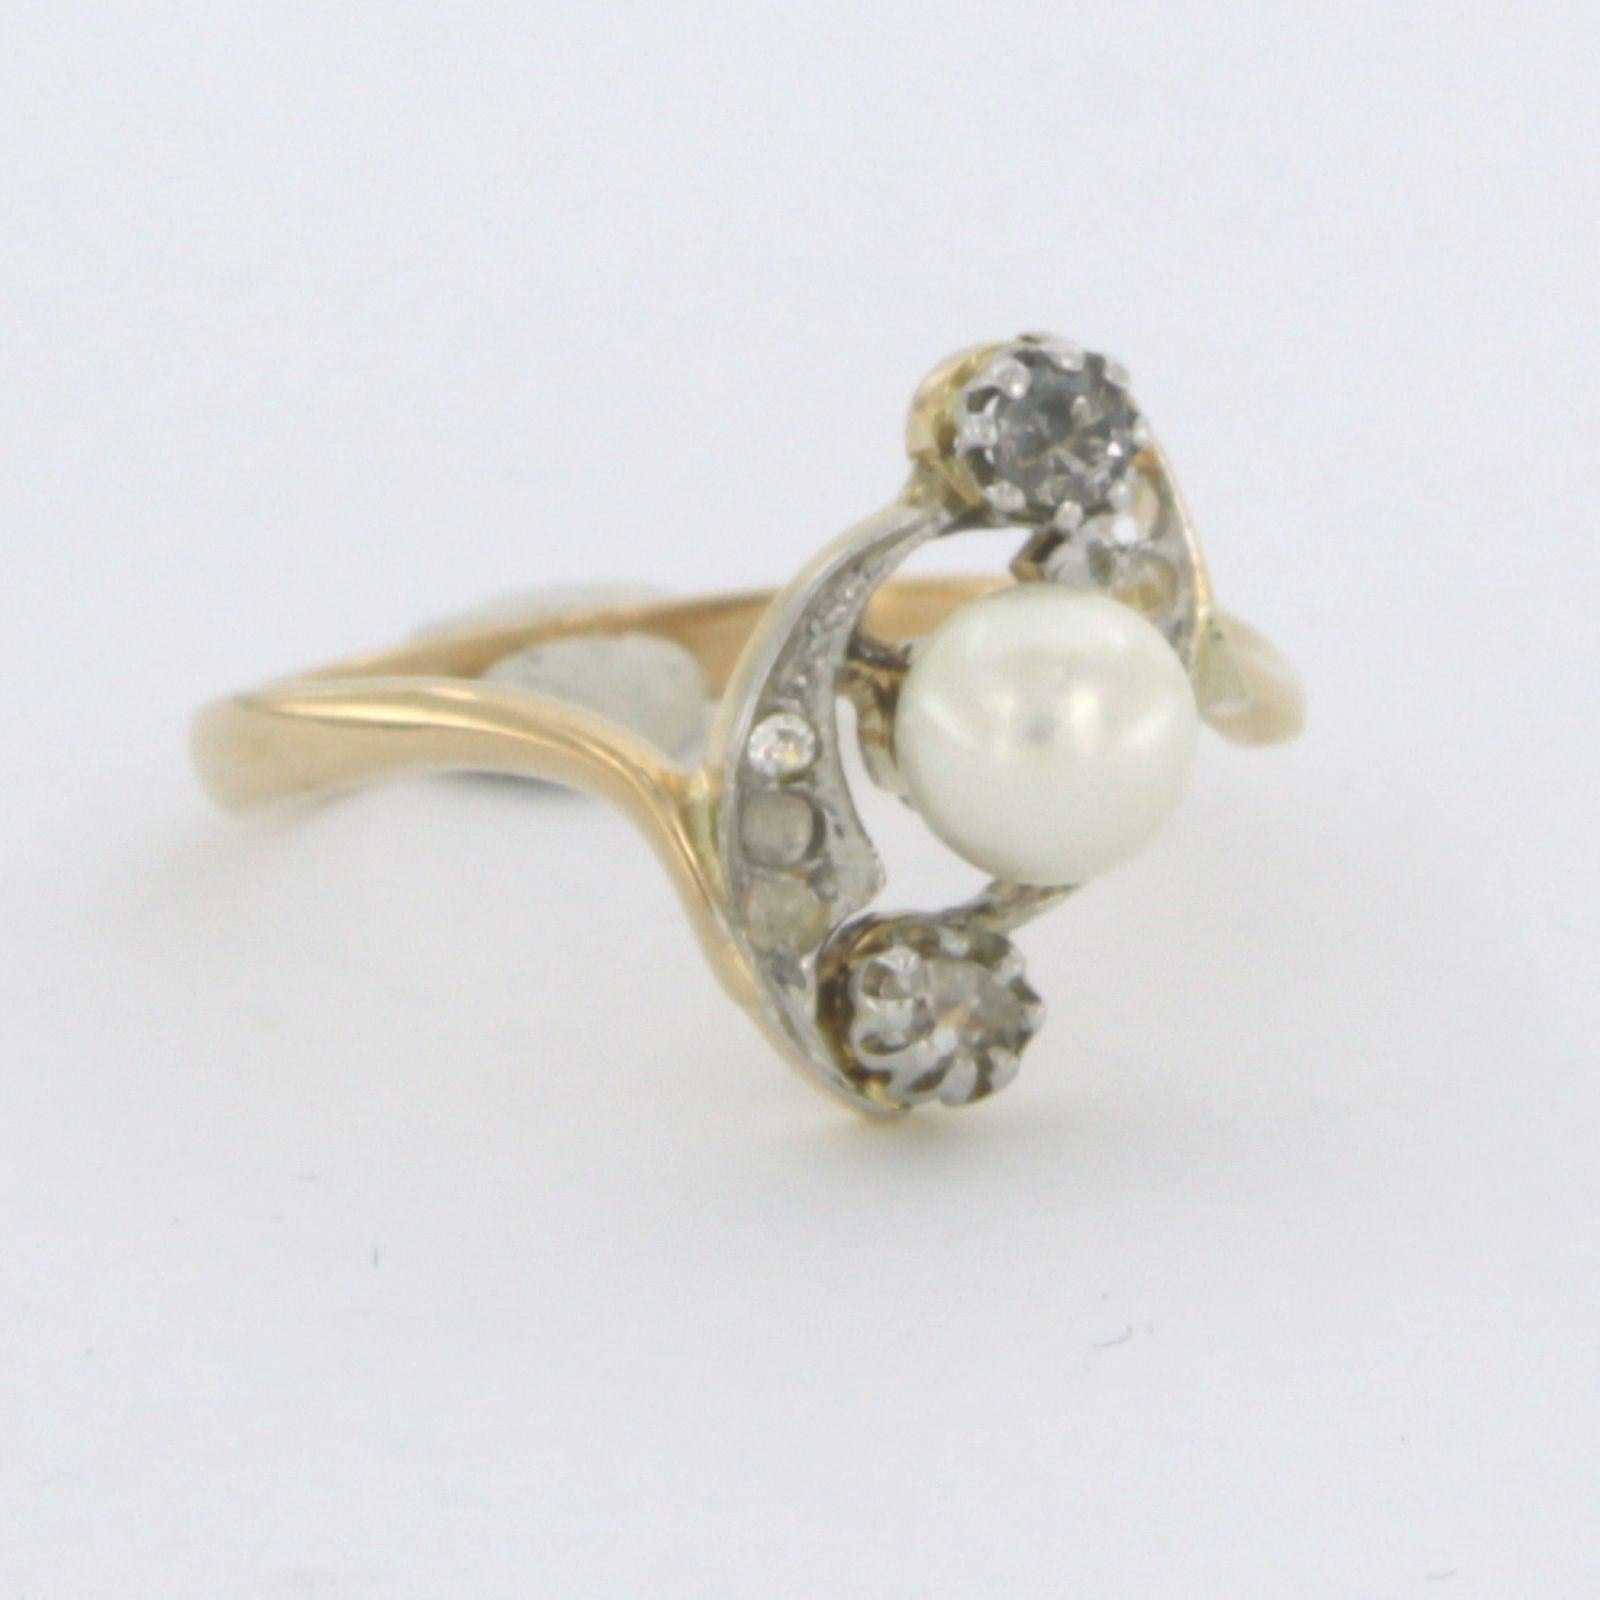 18k bicolour gold ring with pearl and rose cut diamond 0.10ct G/H - SI - ring size US. 7.5 - EU. 17.75 (56)

detailed description

the top of the ring is 1.4 cm wide and 7.5 mm high

Ring size US 7.5 - EU. 17.75 (56), ring can be enlarged or reduced